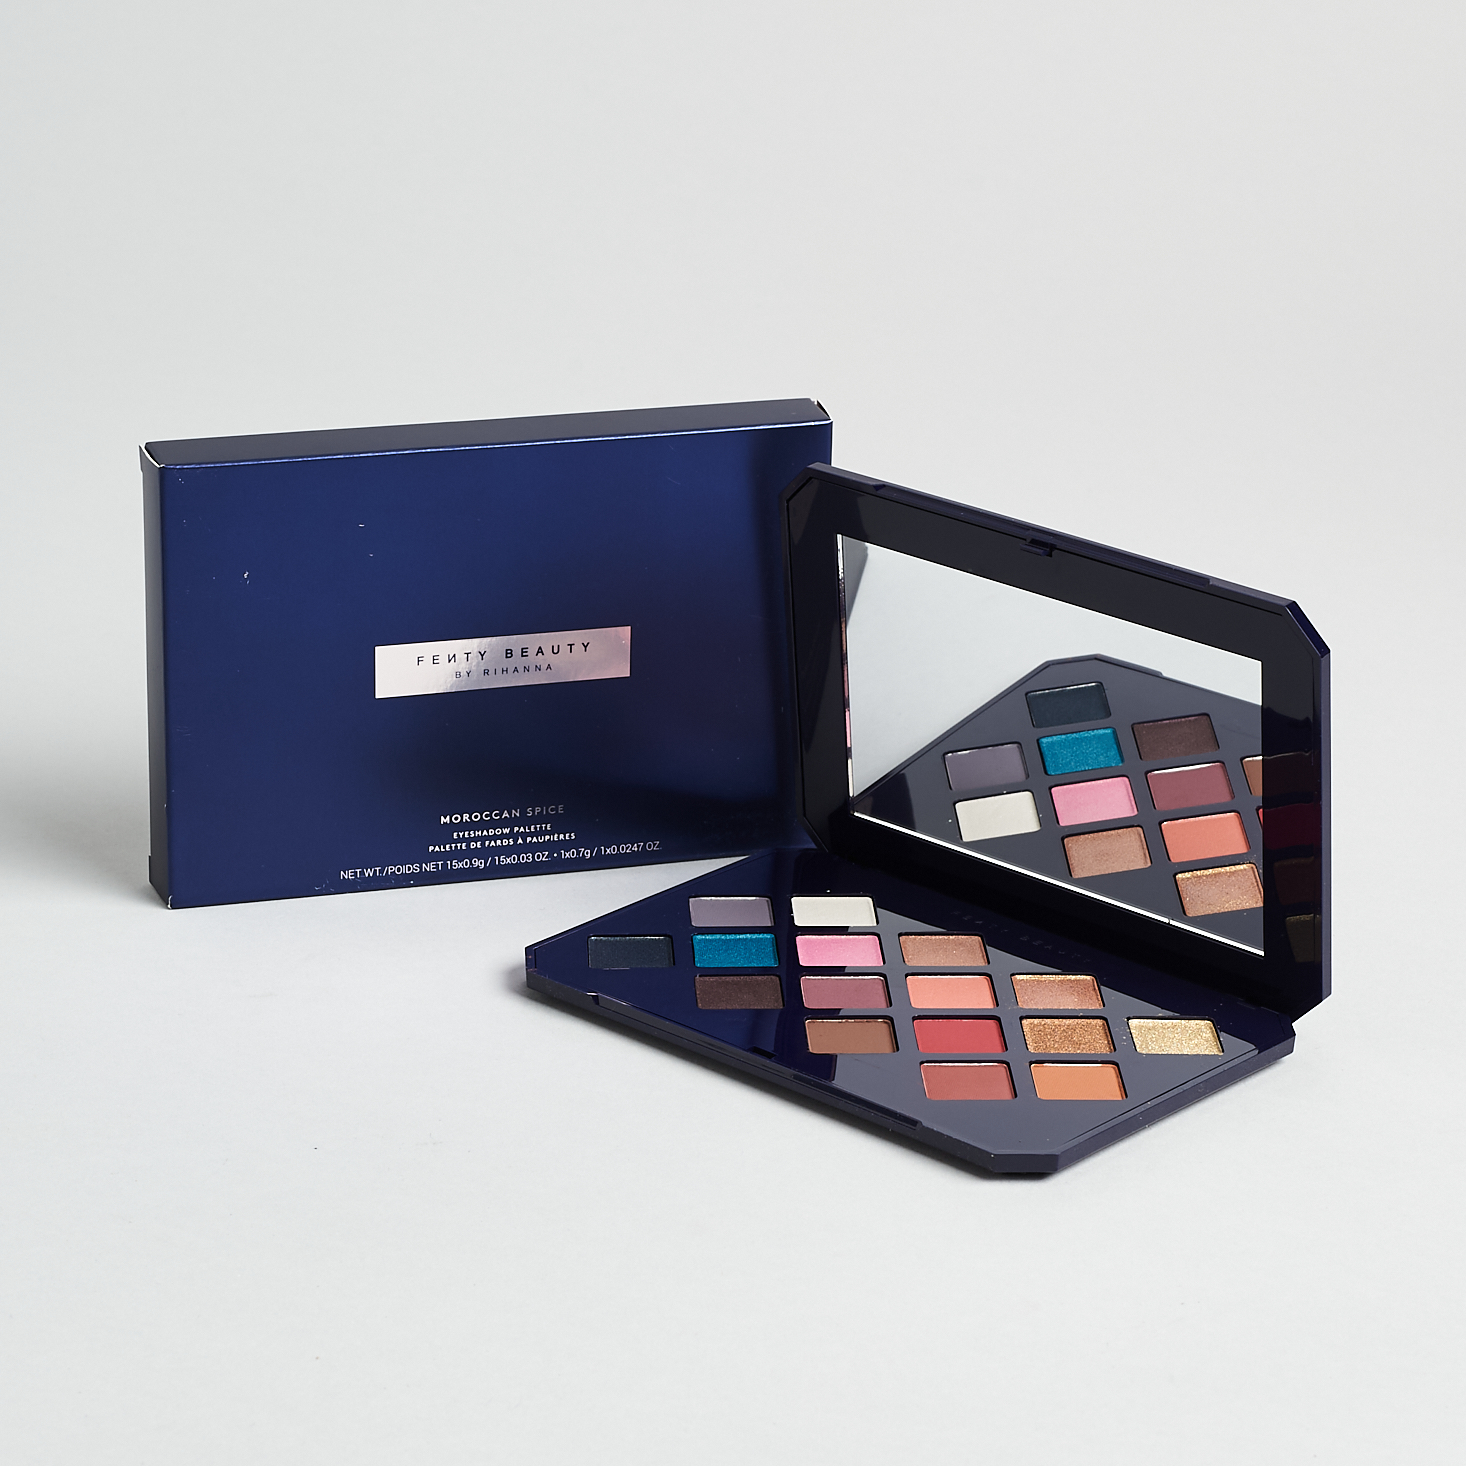 Fenty Beauty Moroccan Spice Eyeshadow Palette with box